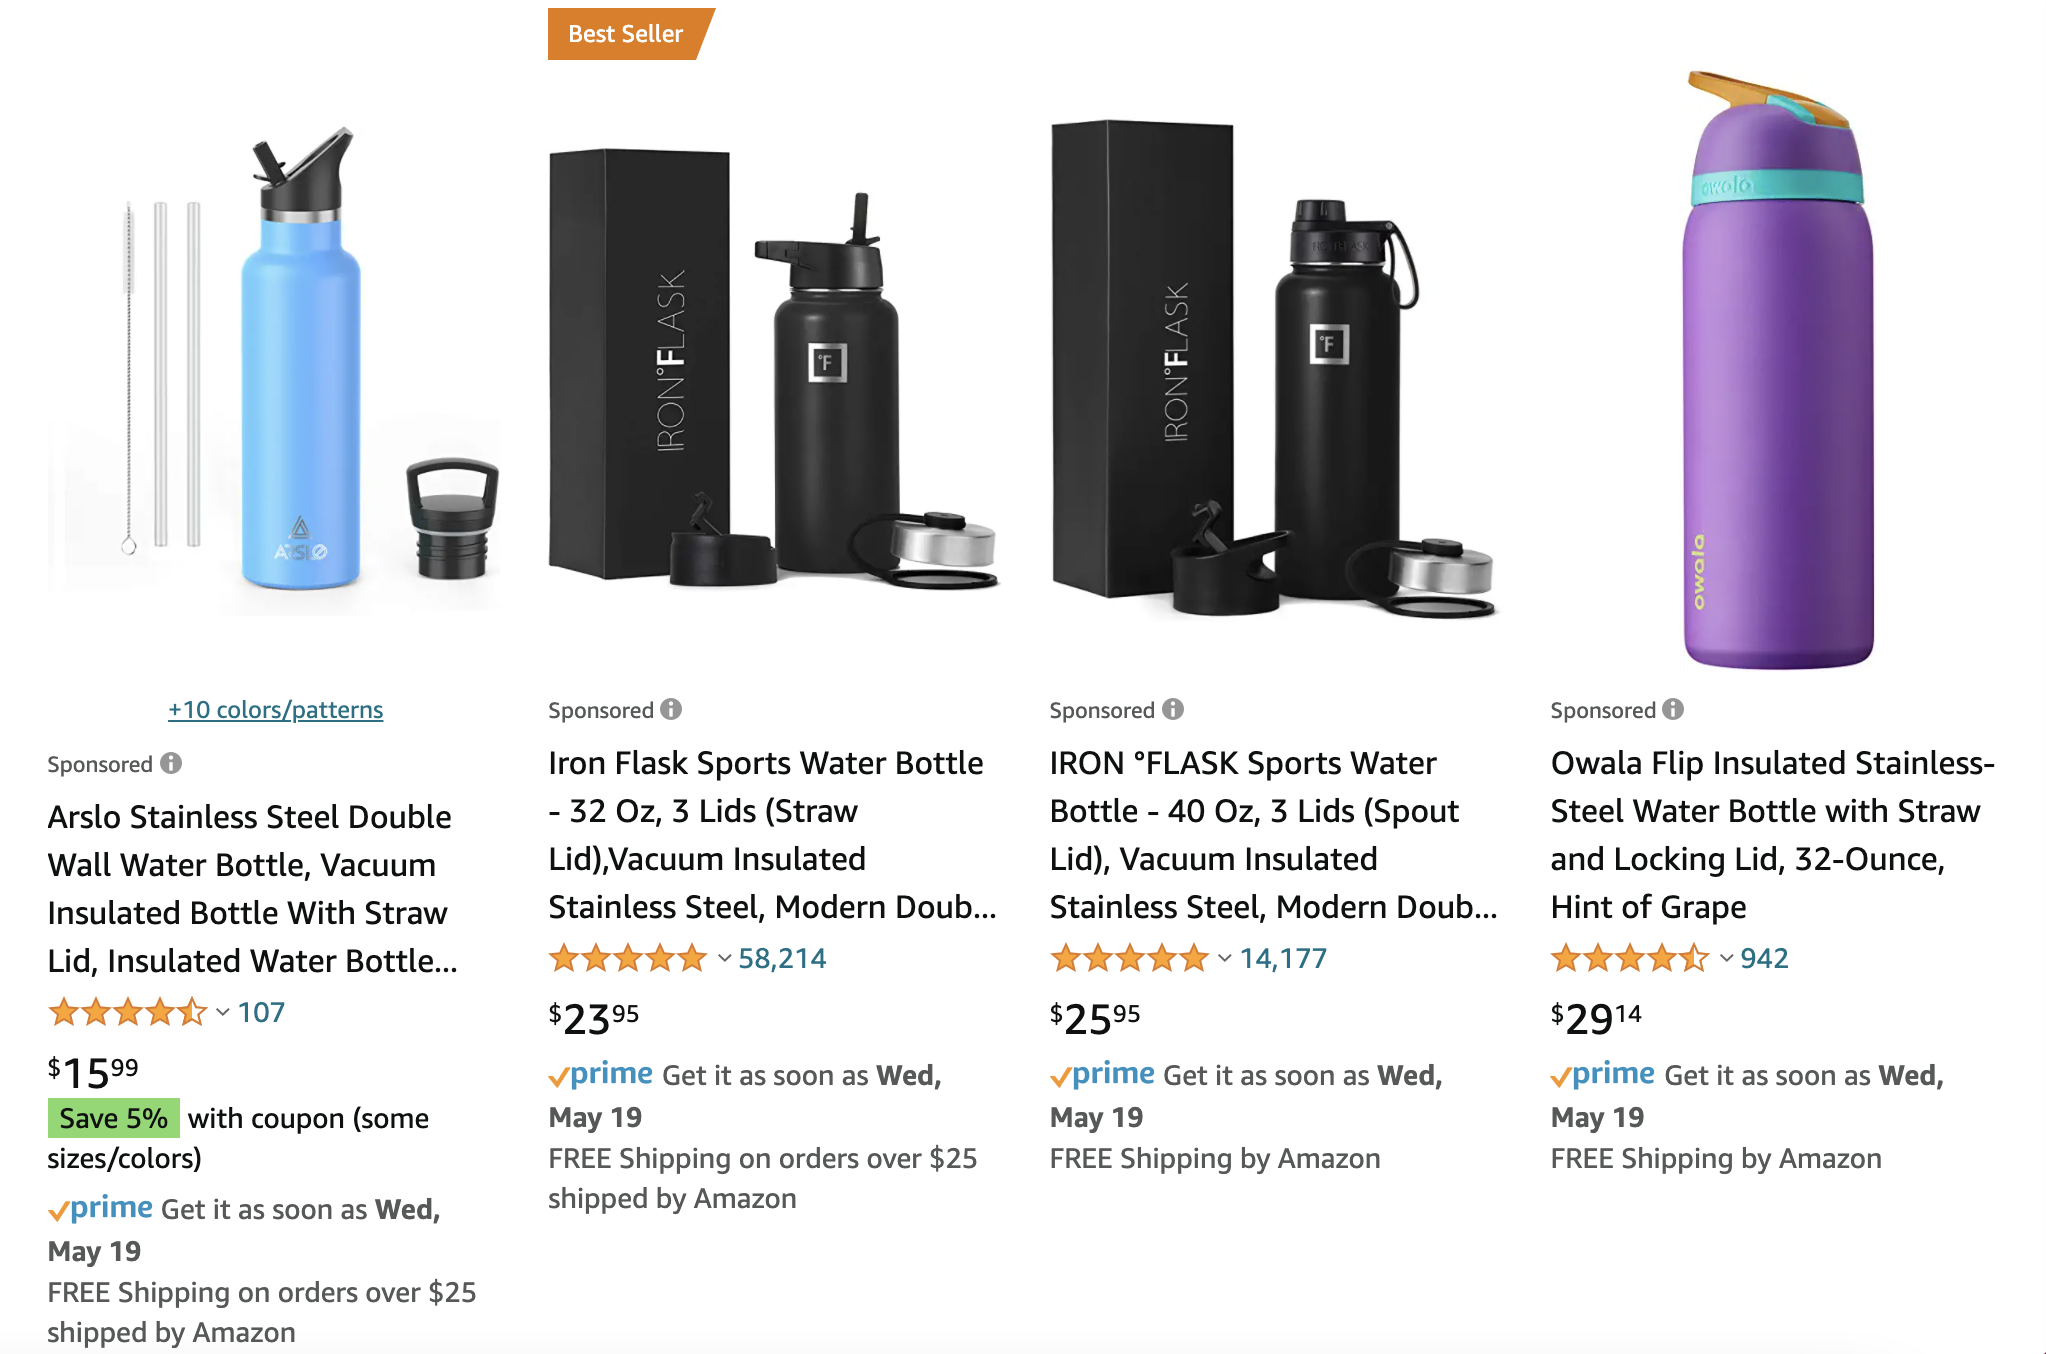 Amazon PPC ads: example of Amazon sponsored listings for insulated water bottles